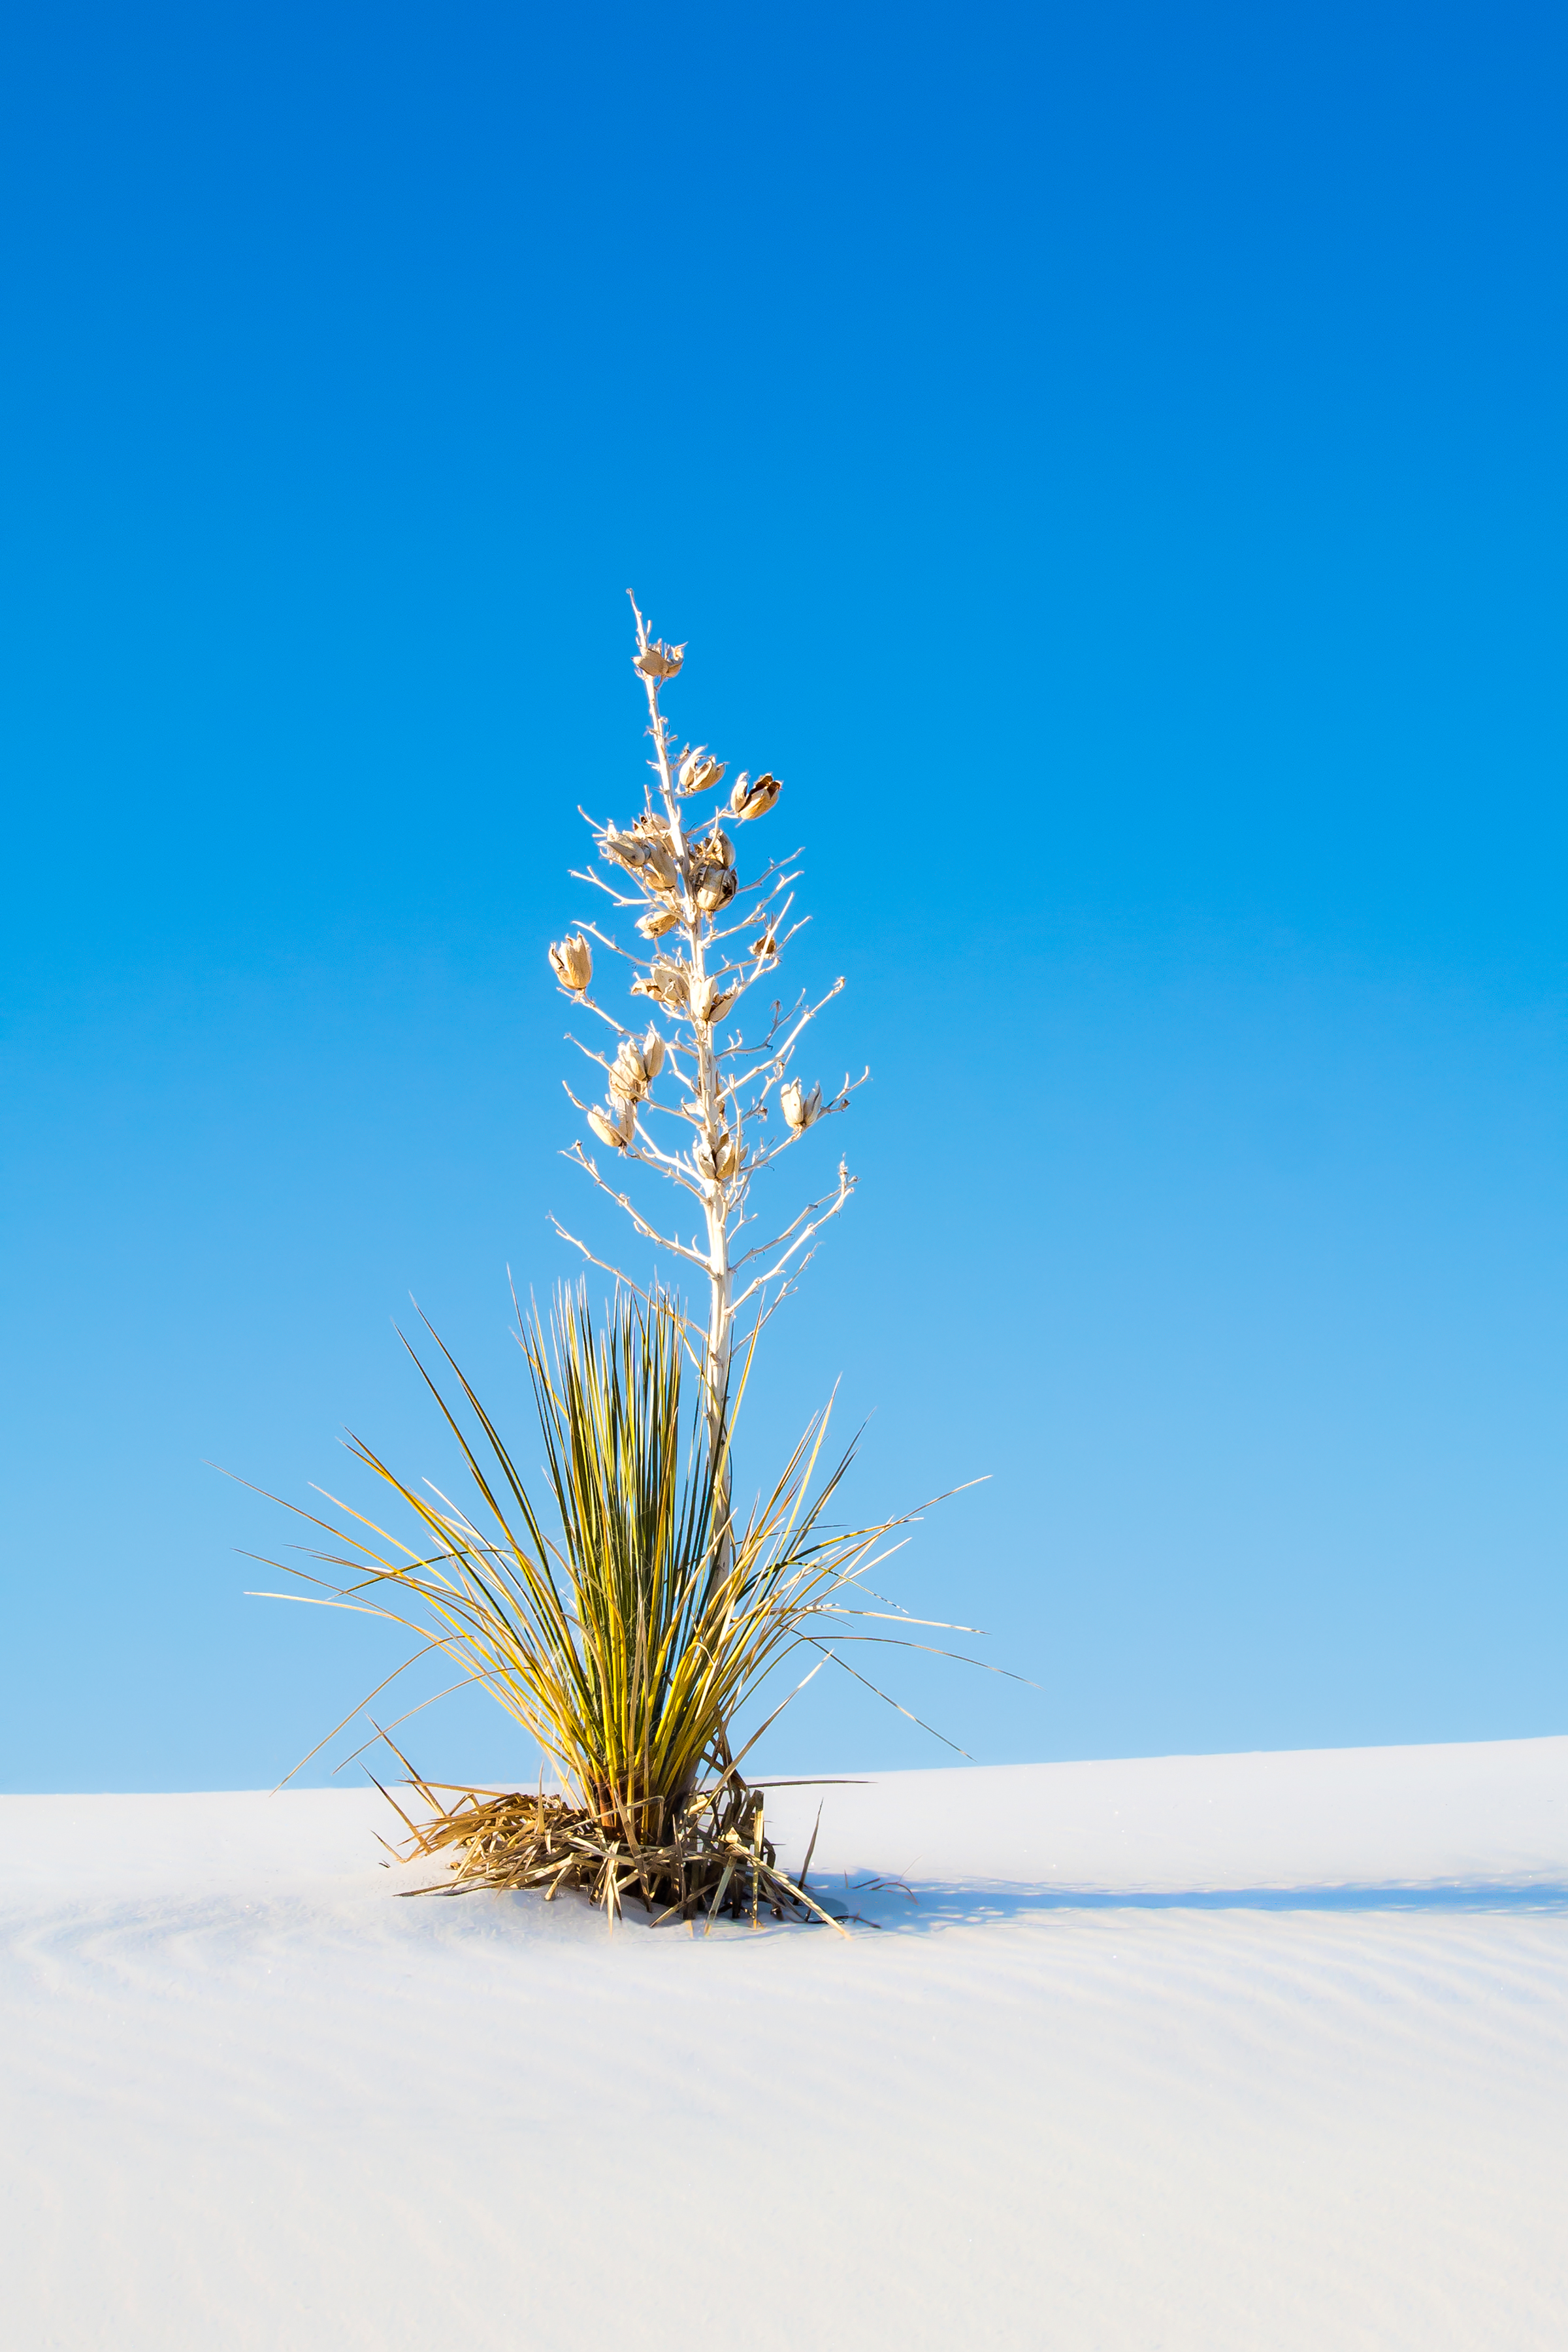 ORT OF A MONUMENT - I took this shot in White Sands National Monument in New Mexico.